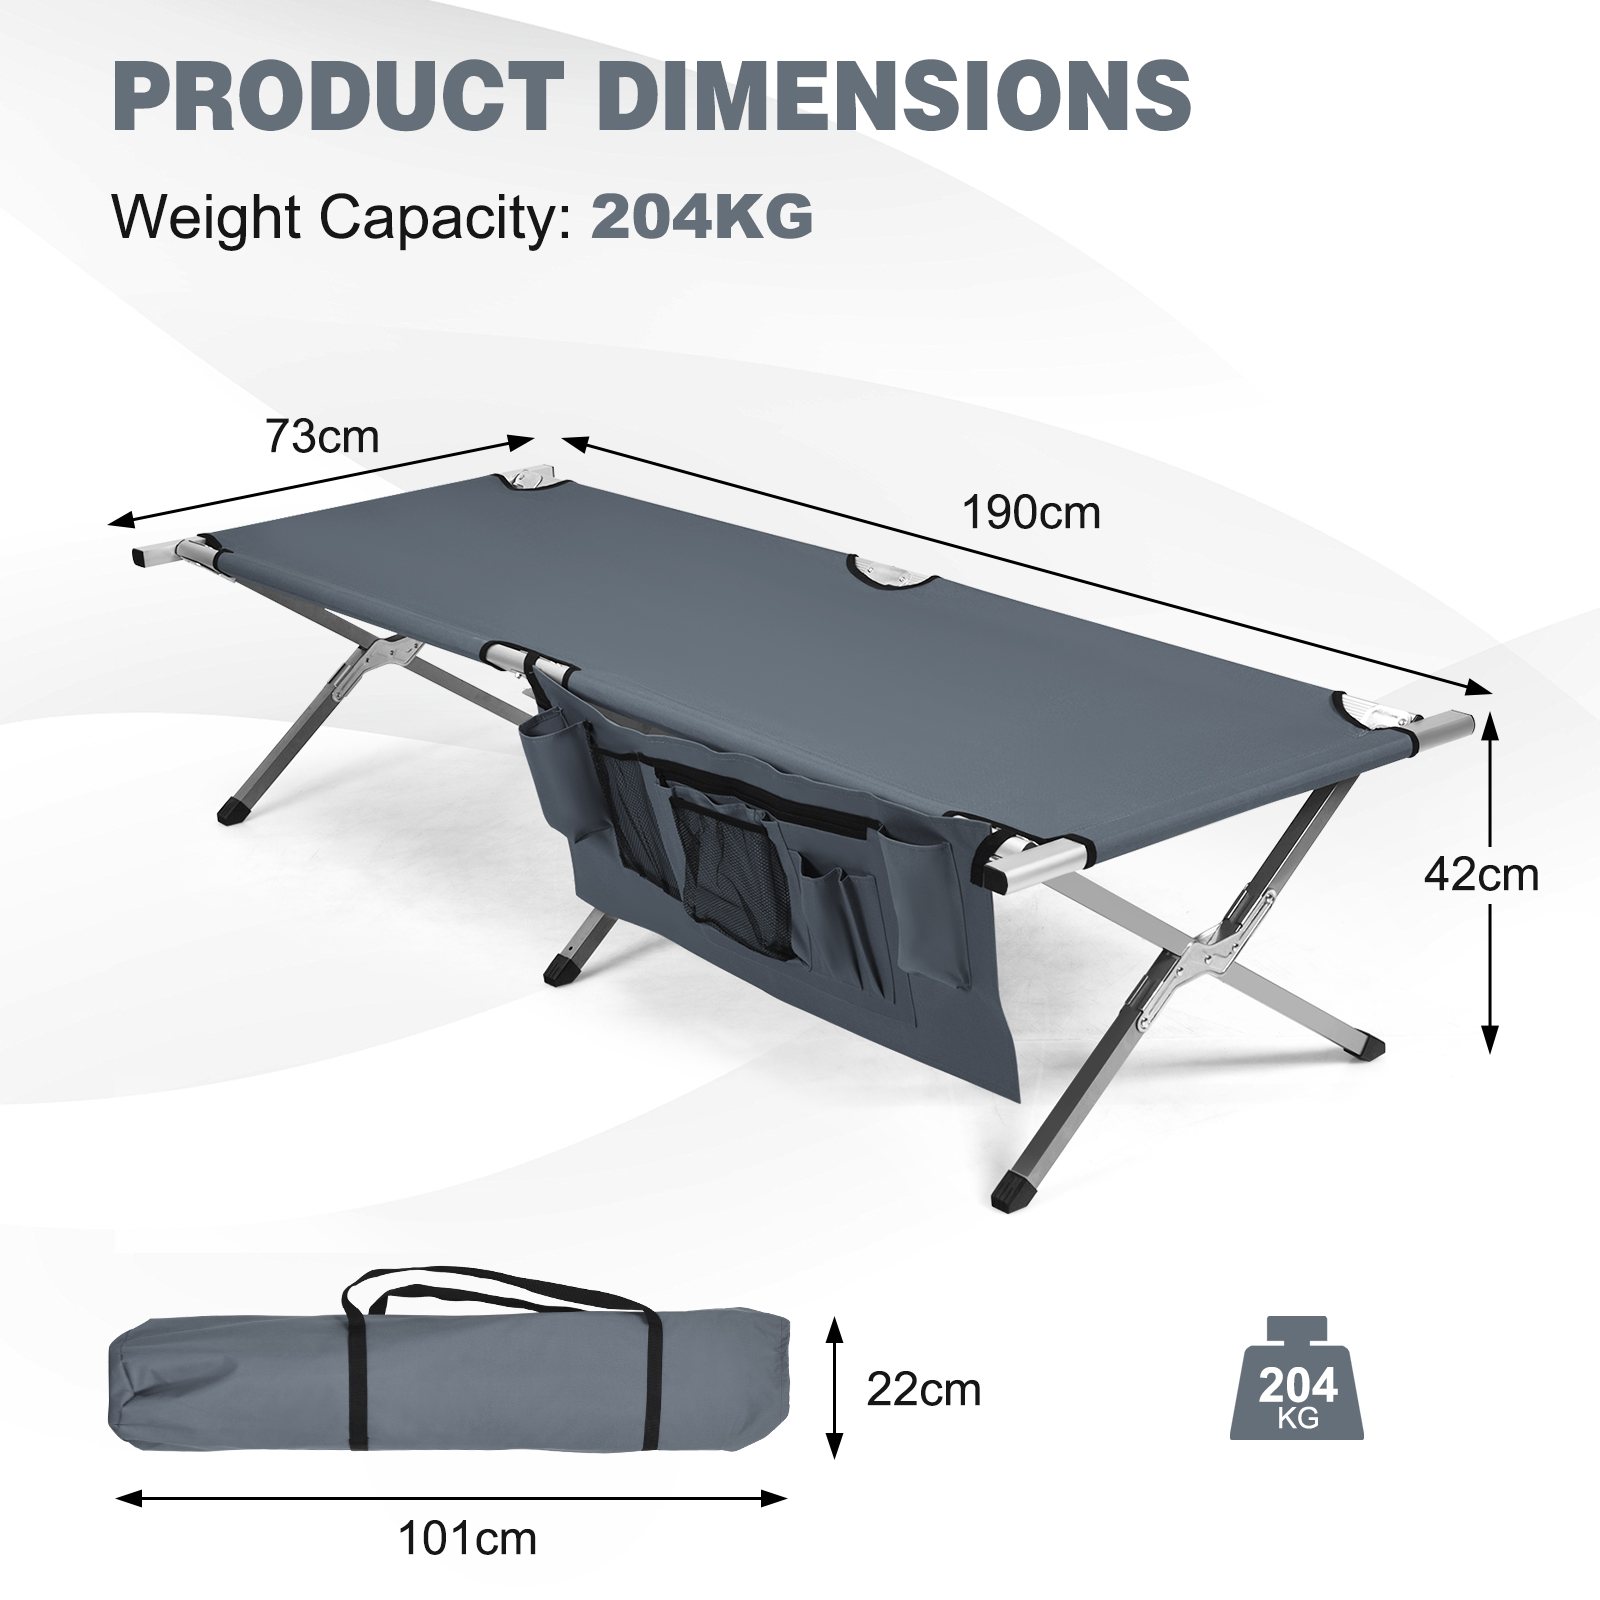 Folding_Camping_Bed_Outdoor_Sleeping_Cot_with_Carry_Bag_for_Beach_Grey_size-4.jpg